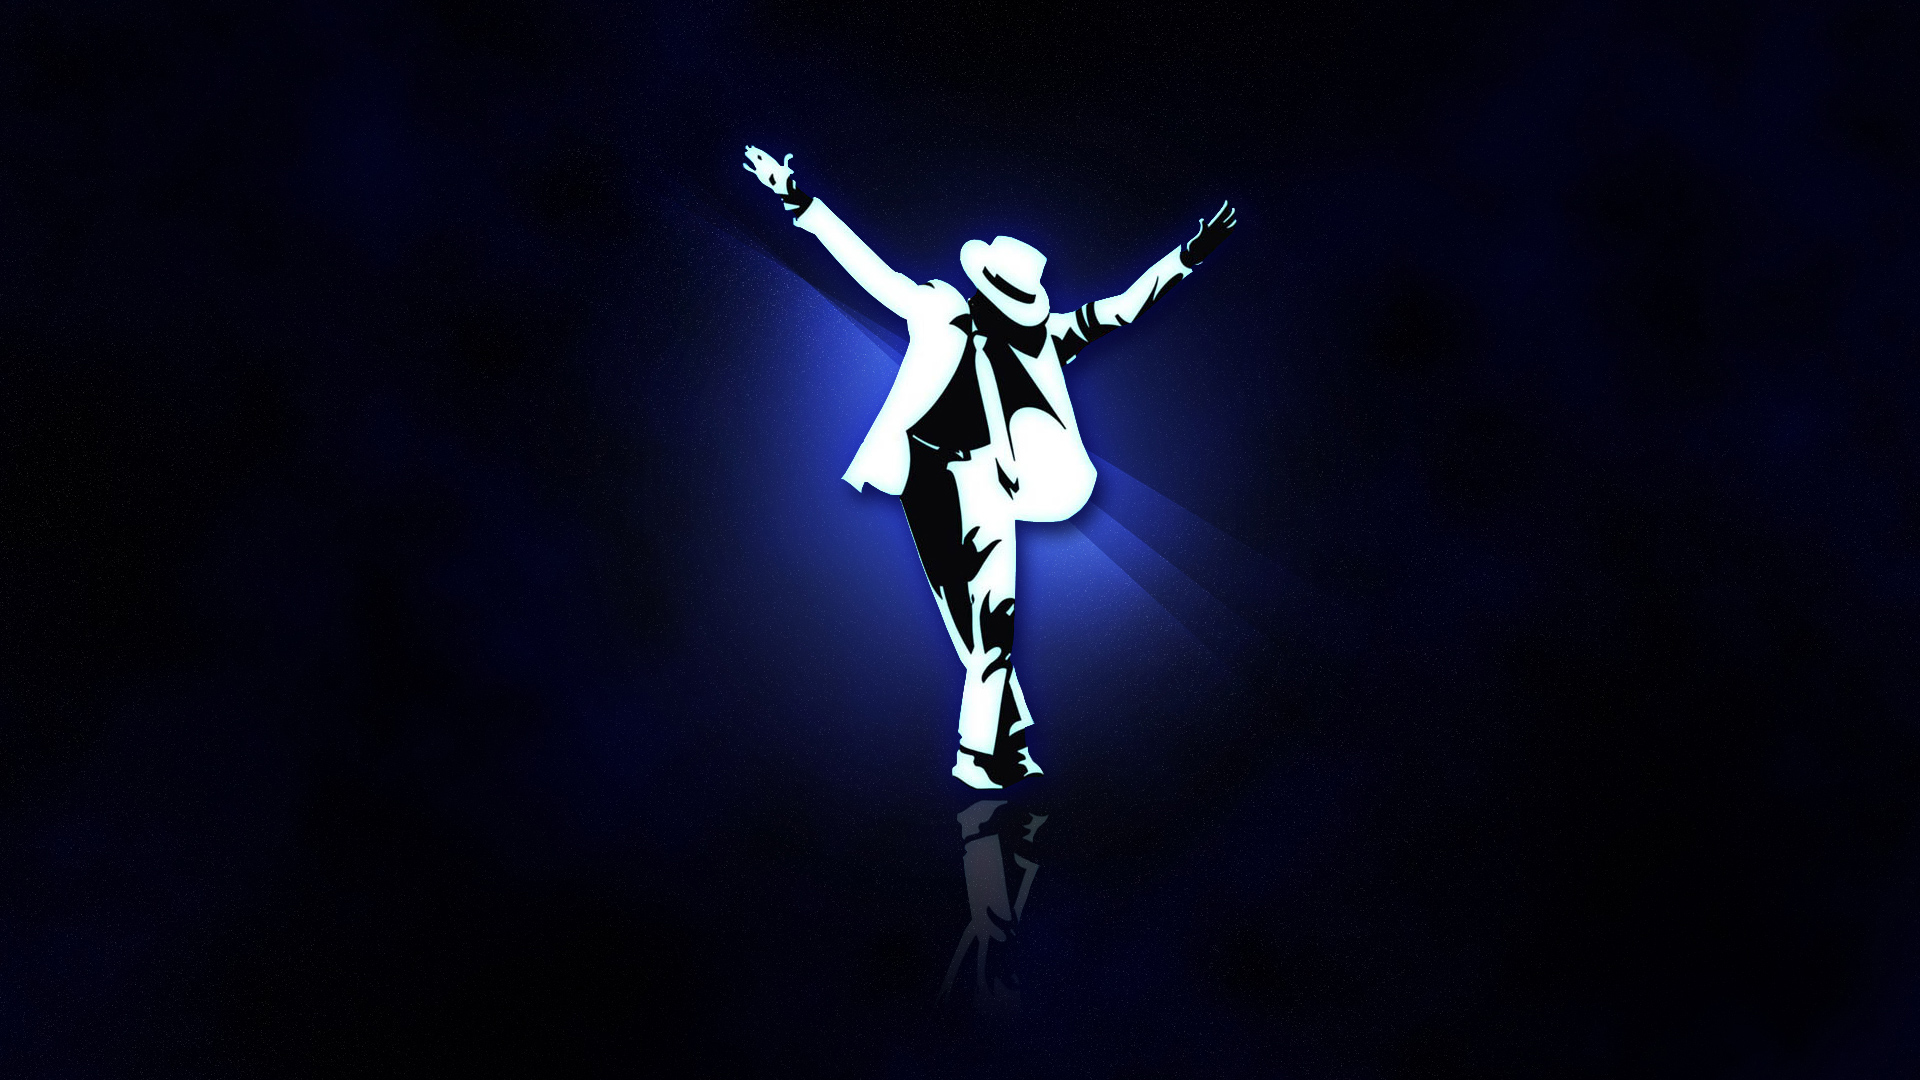 Michael jackson, music, wallpaper, related, other (#6933)